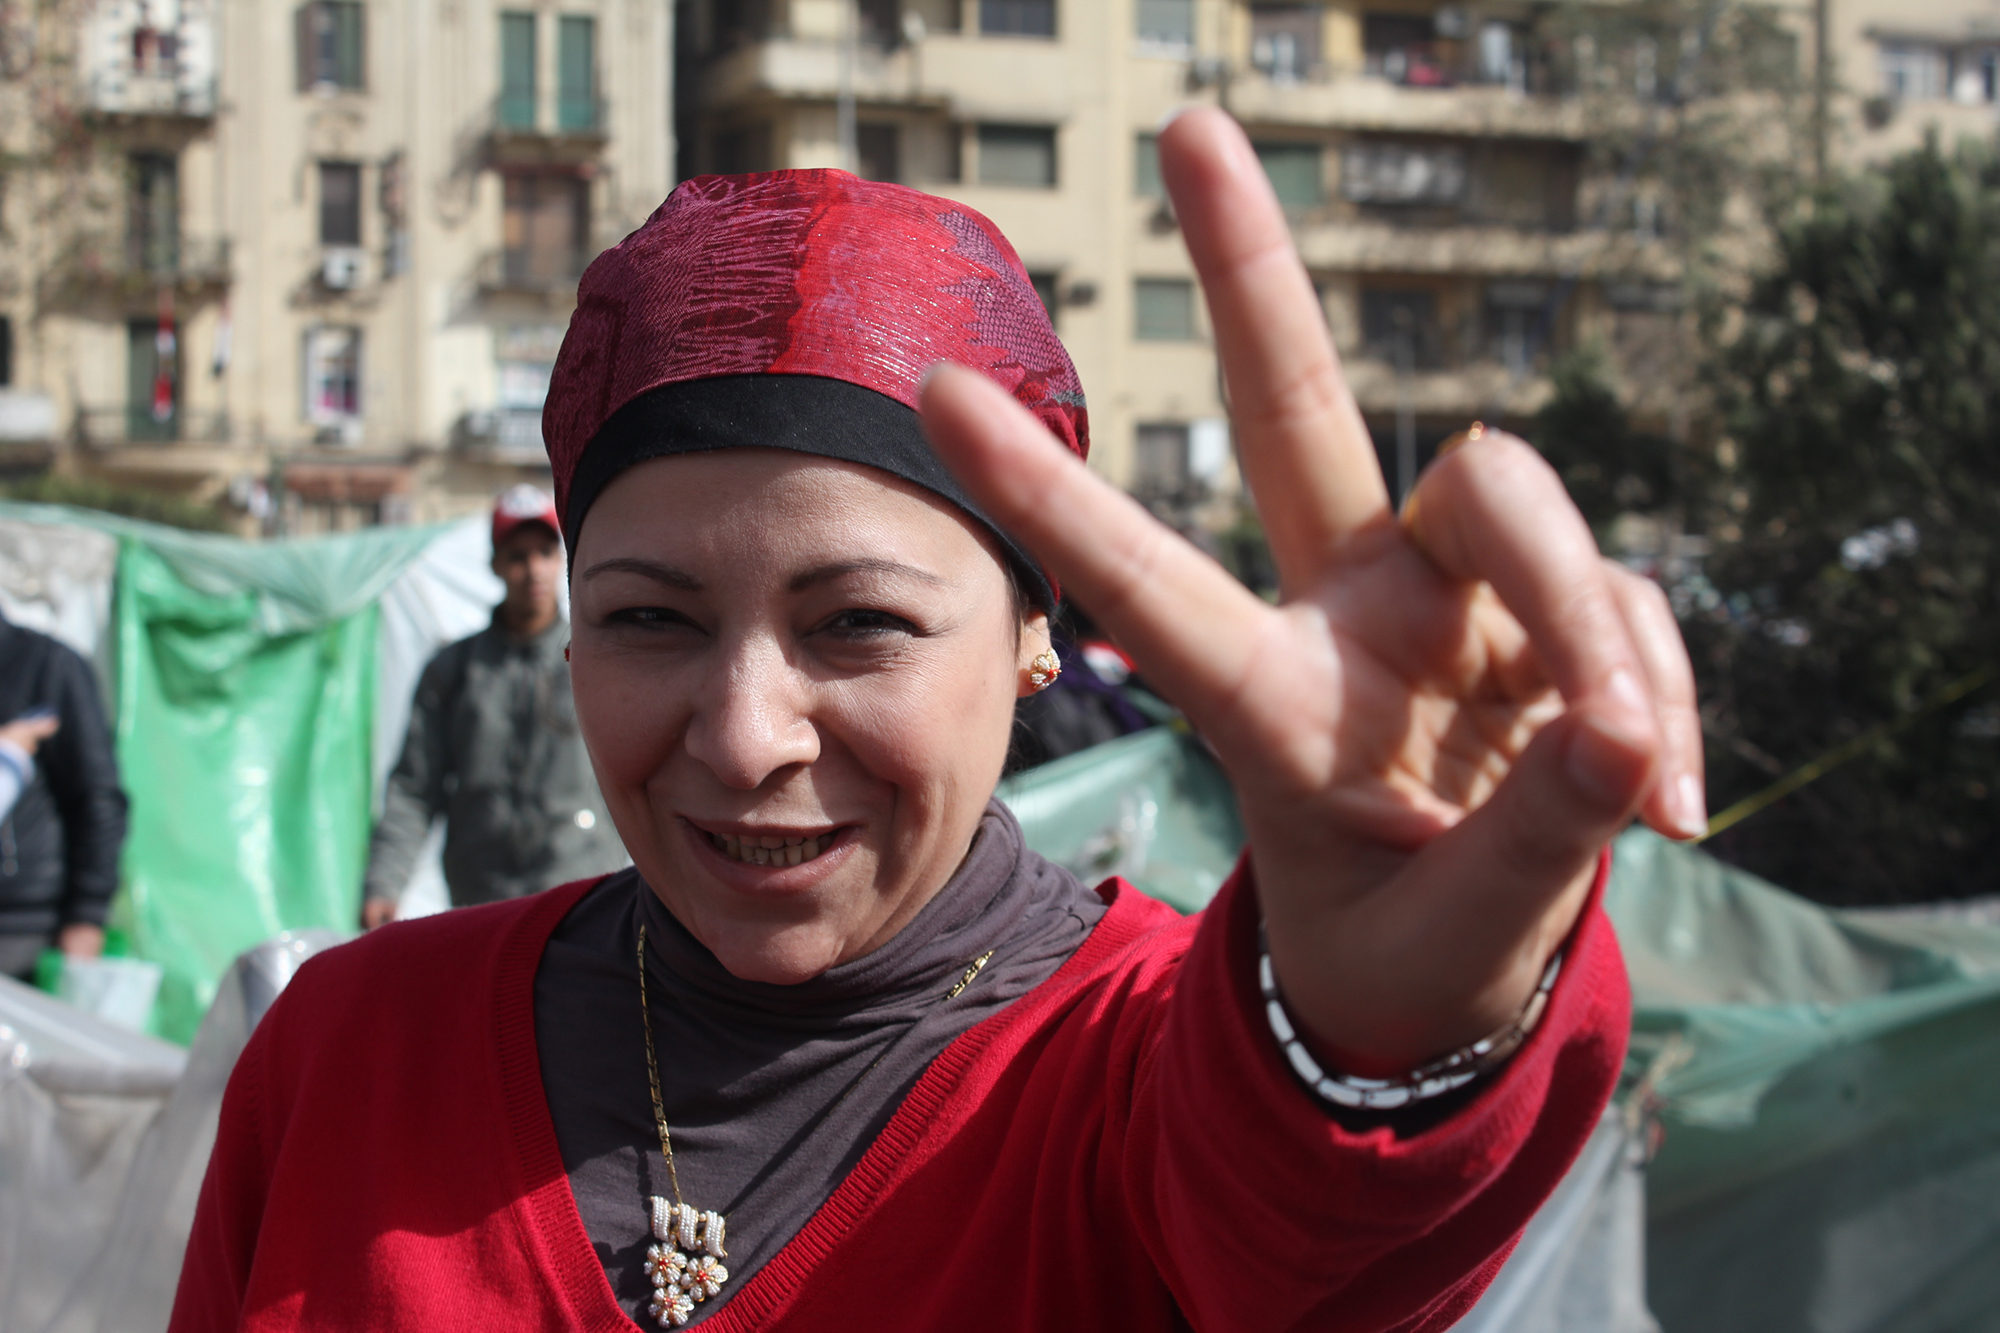 A woman flashes a peace sign at the camera in Egypt